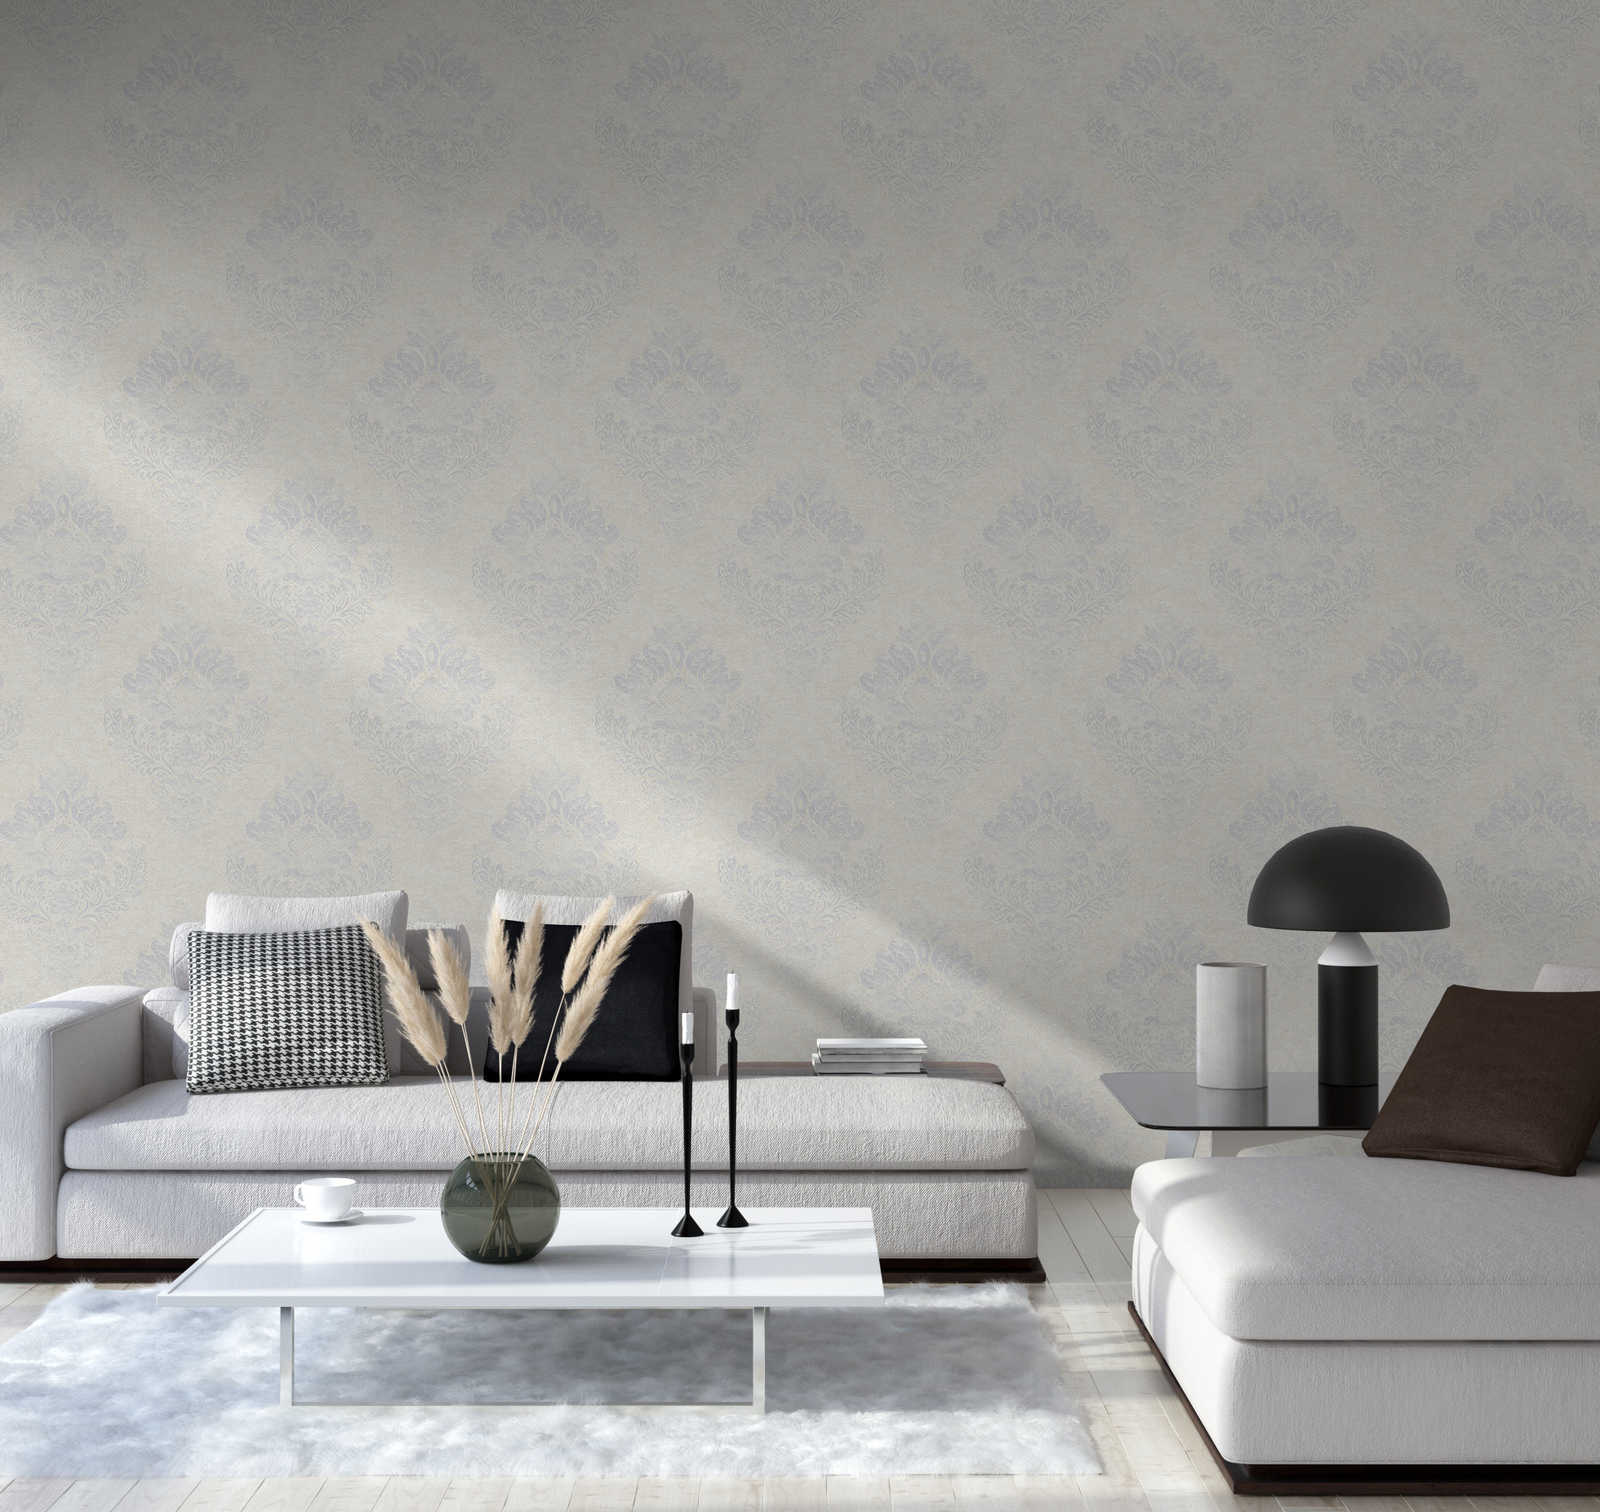             Non-woven wallpaper with floral ornaments & metallic luster - beige, grey, white
        